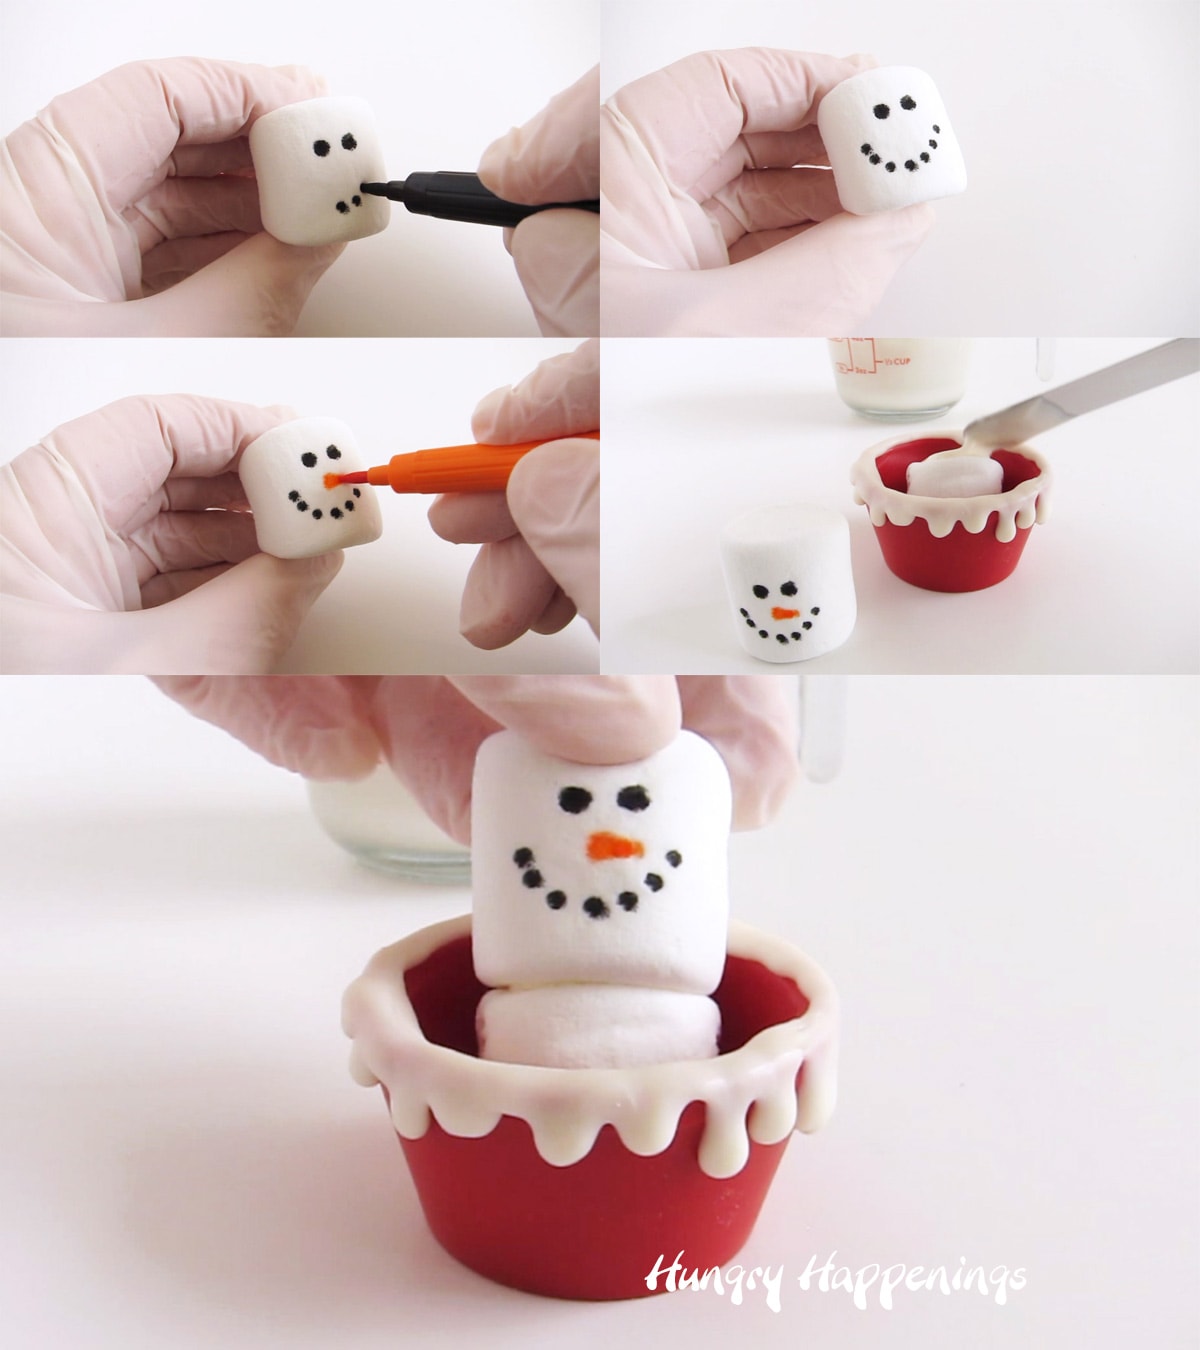 Drawing a face onto a marshmallow snowman using a food coloring marker.